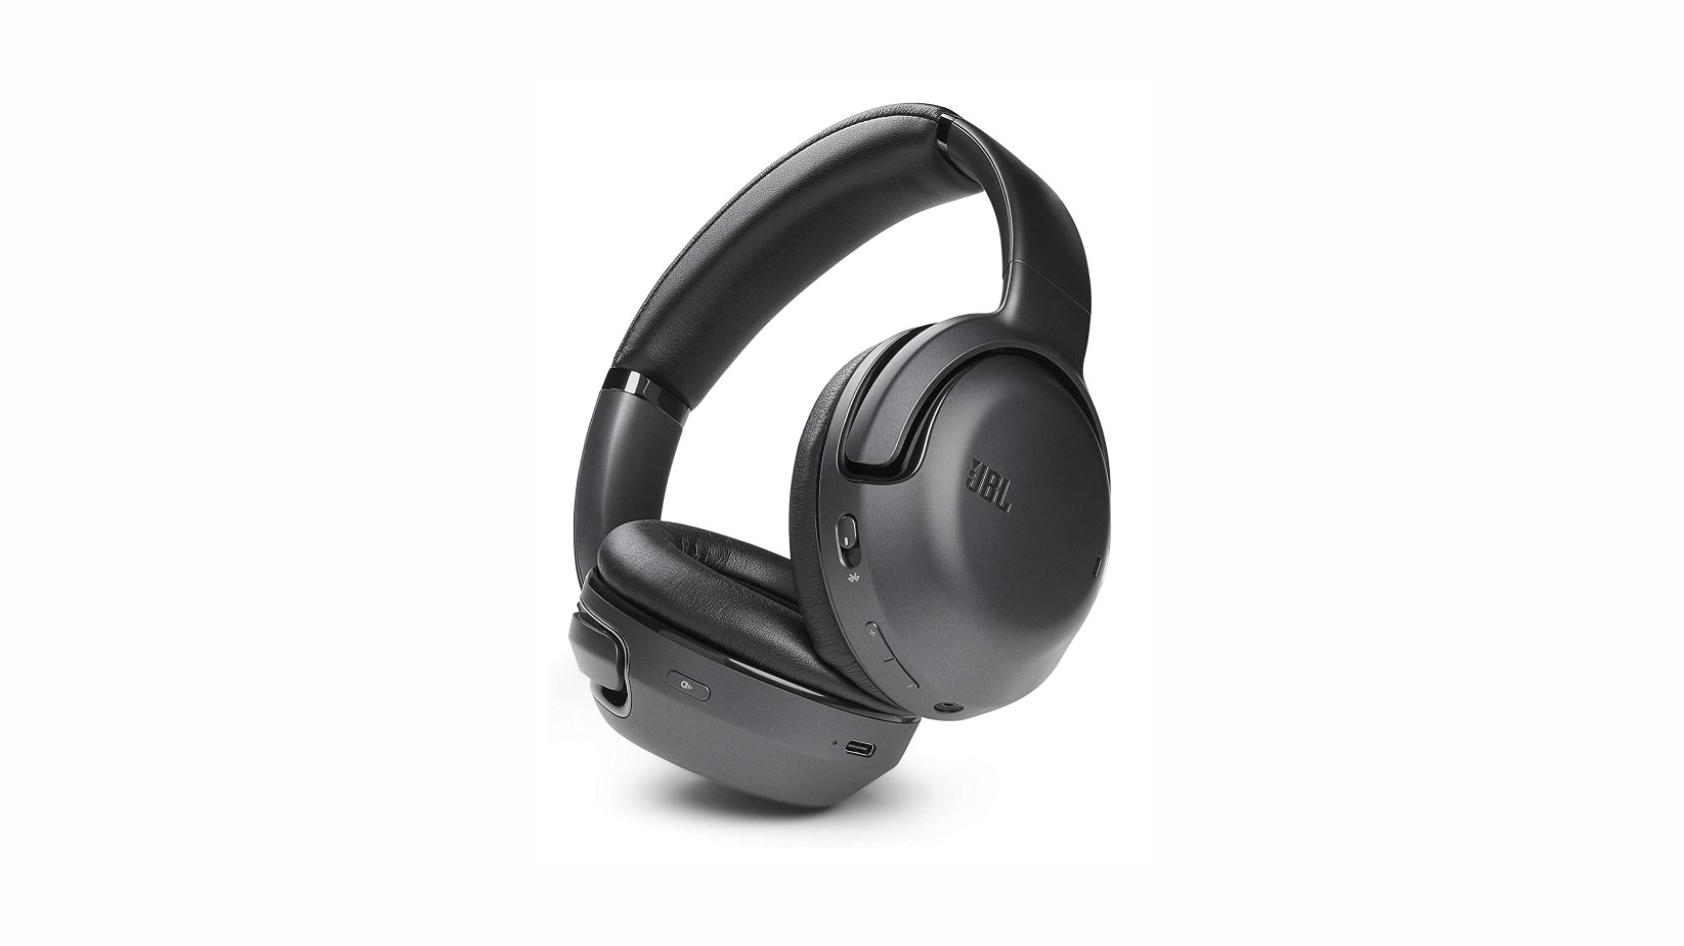 Product shot of JBL Tour One Wireless headphones.